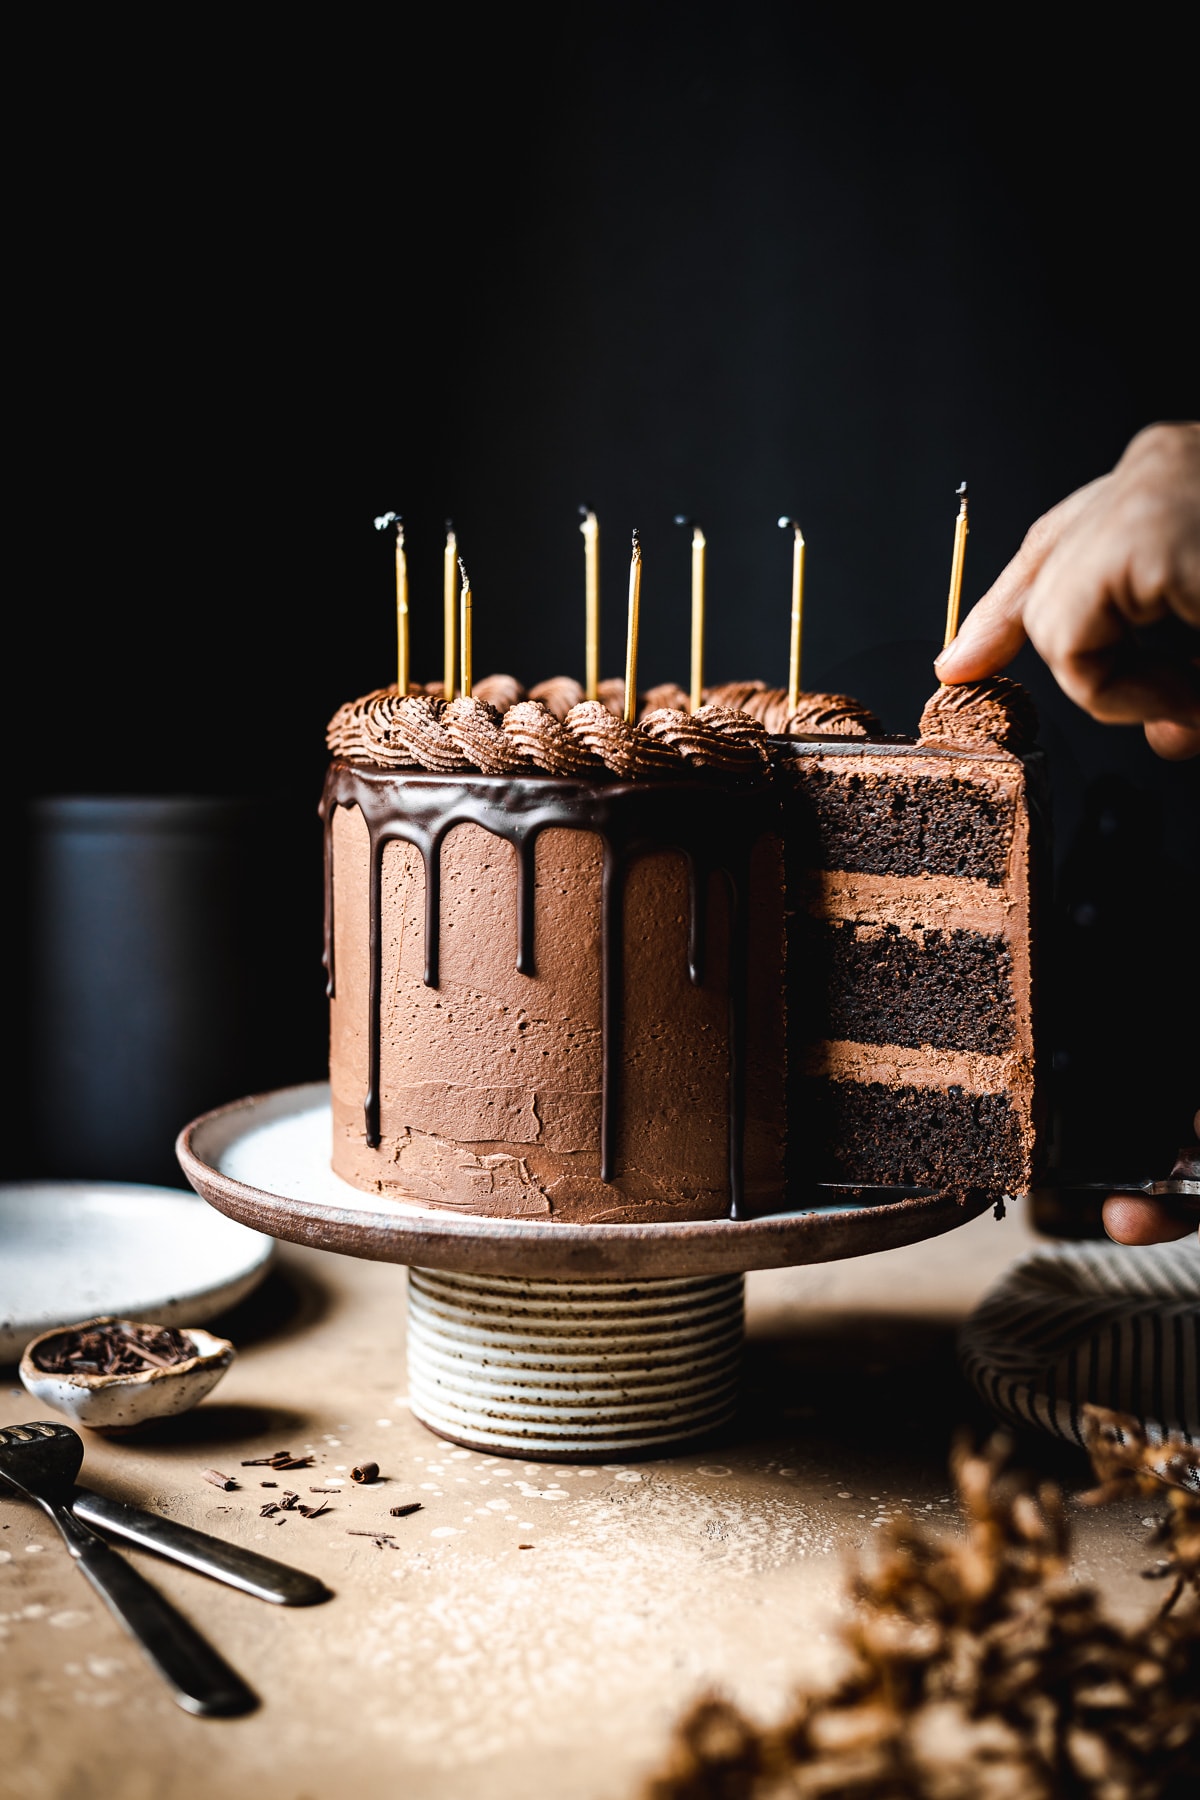 A moody image of hands removing a slice of chocolate cake from a ceramic cake stand on a tan stone surface. There are candles on the cake. Plates, a napkin, and forks rest nearby. The background is black.